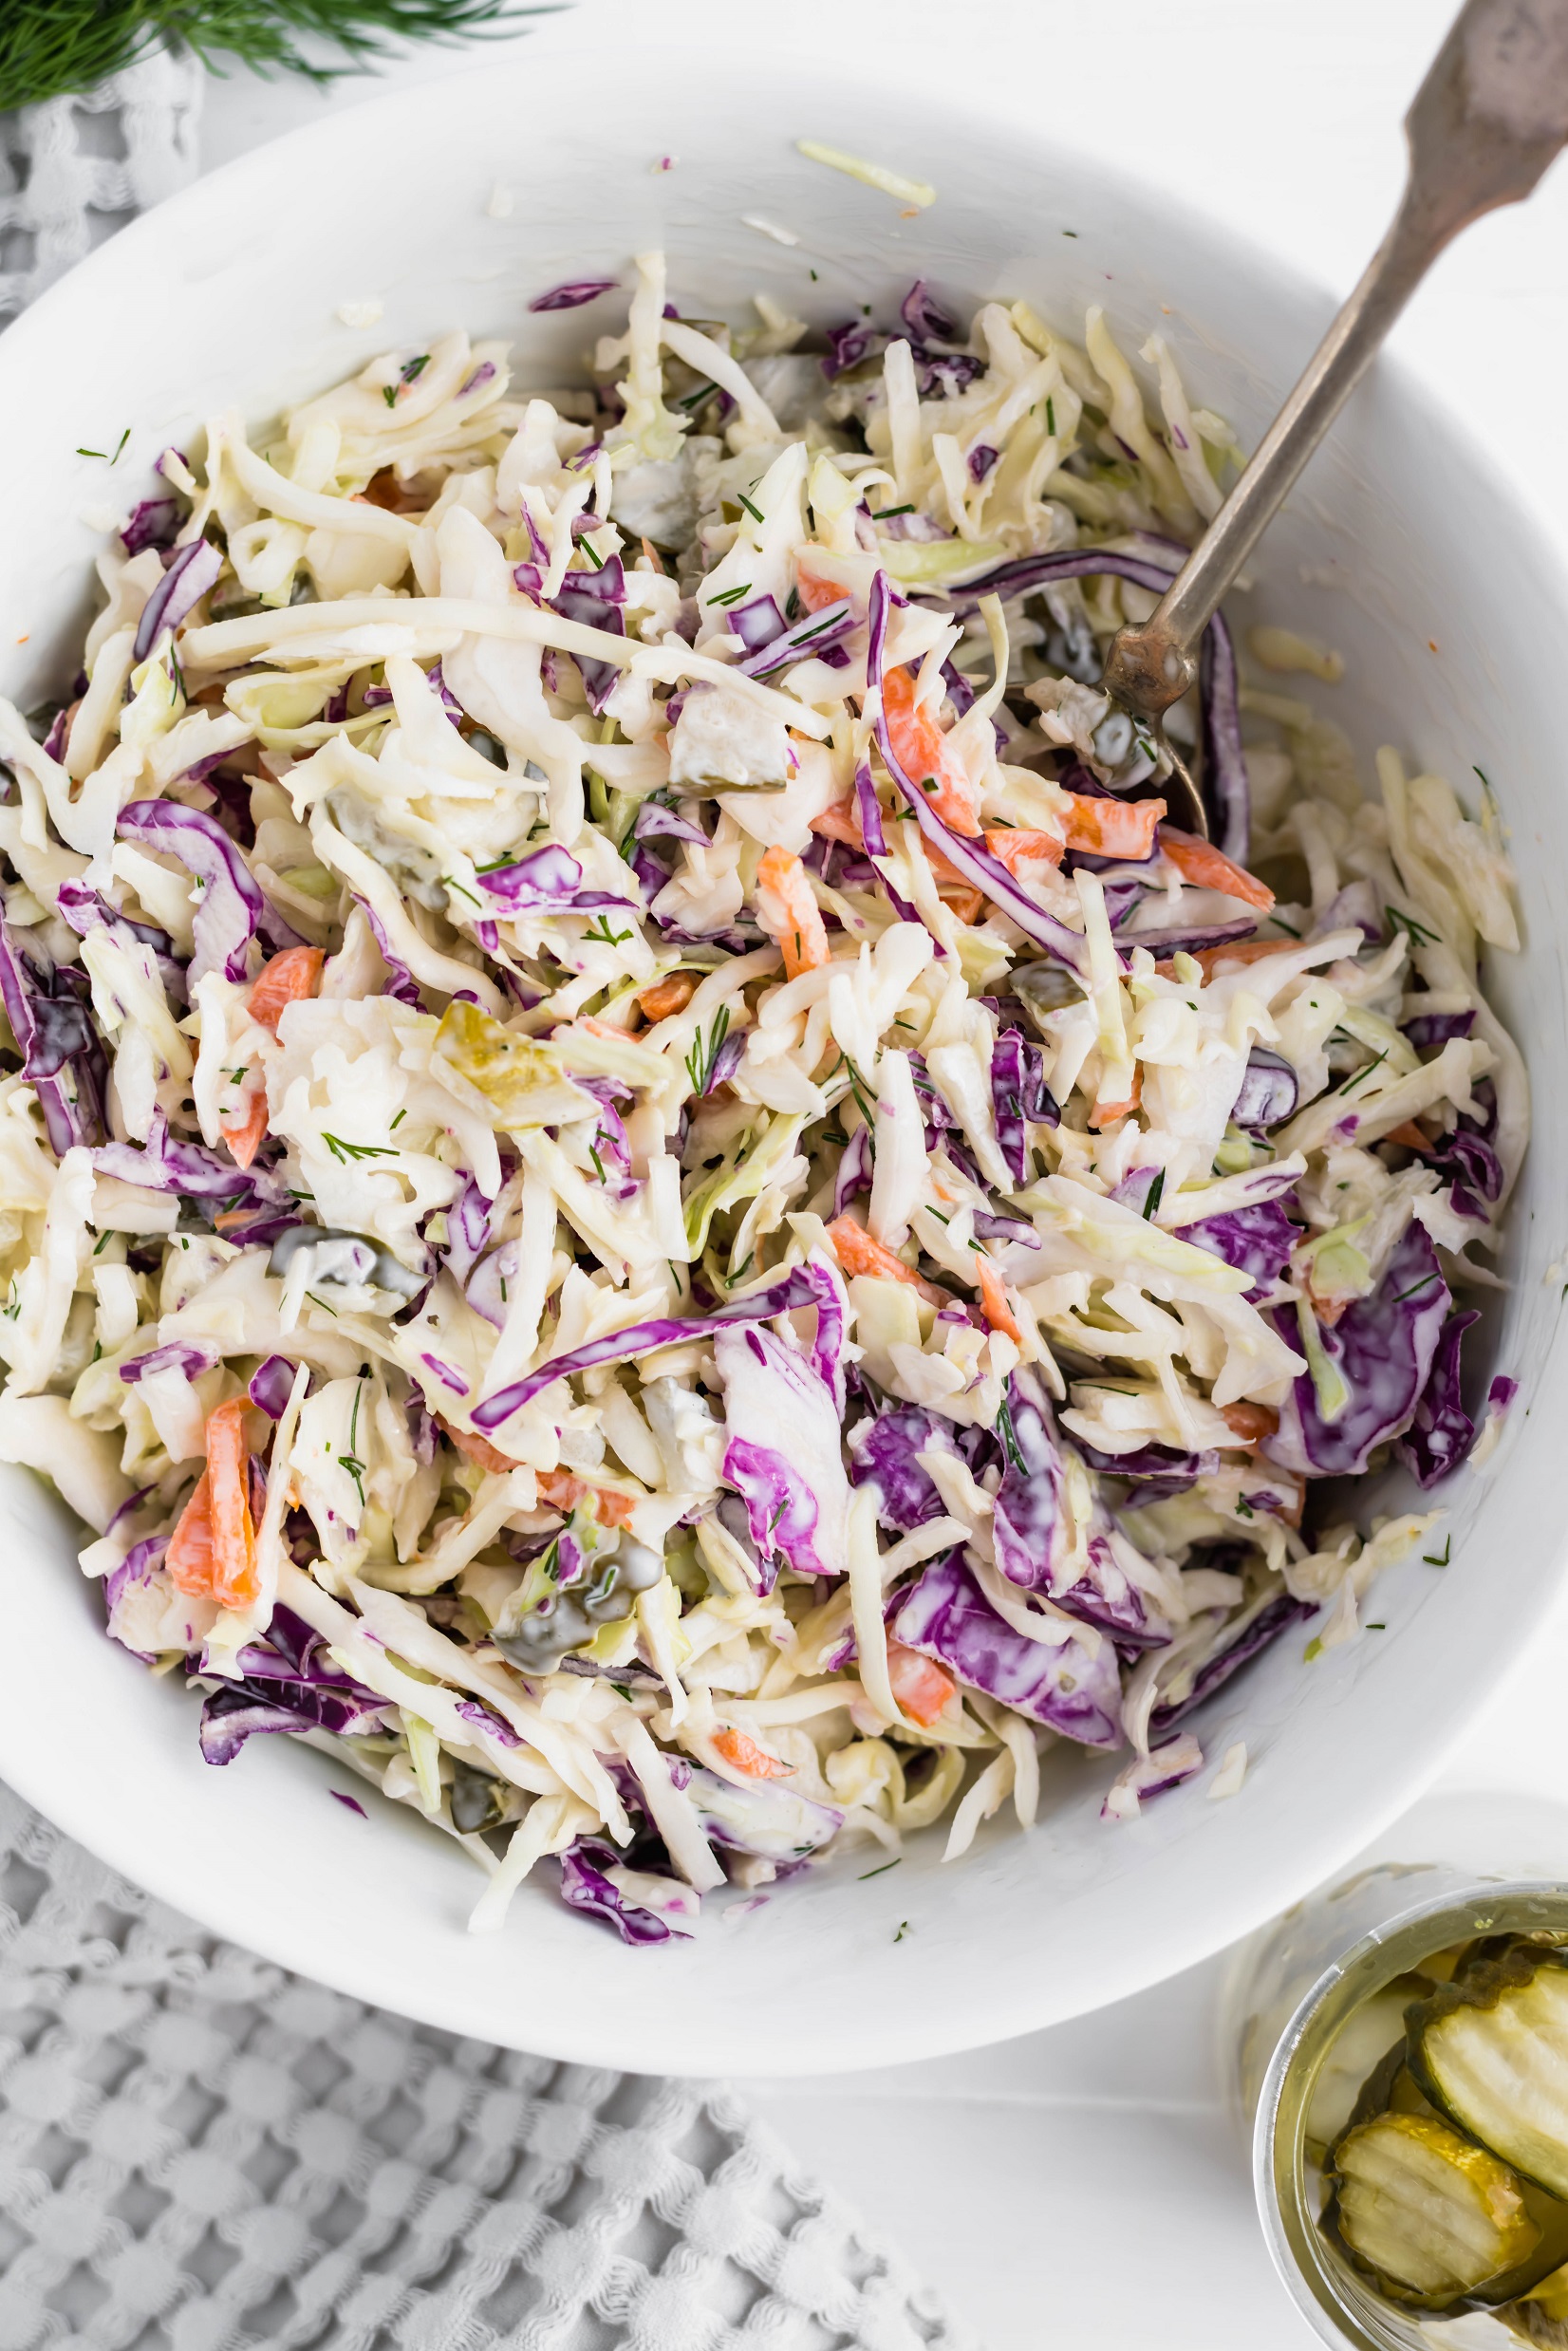 Change up your classic coleslaw with this Dill Pickle Coleslaw. Creamy dressing spiked with pickle juice, chopped pickles and fresh dill brings all the pickle flavor.